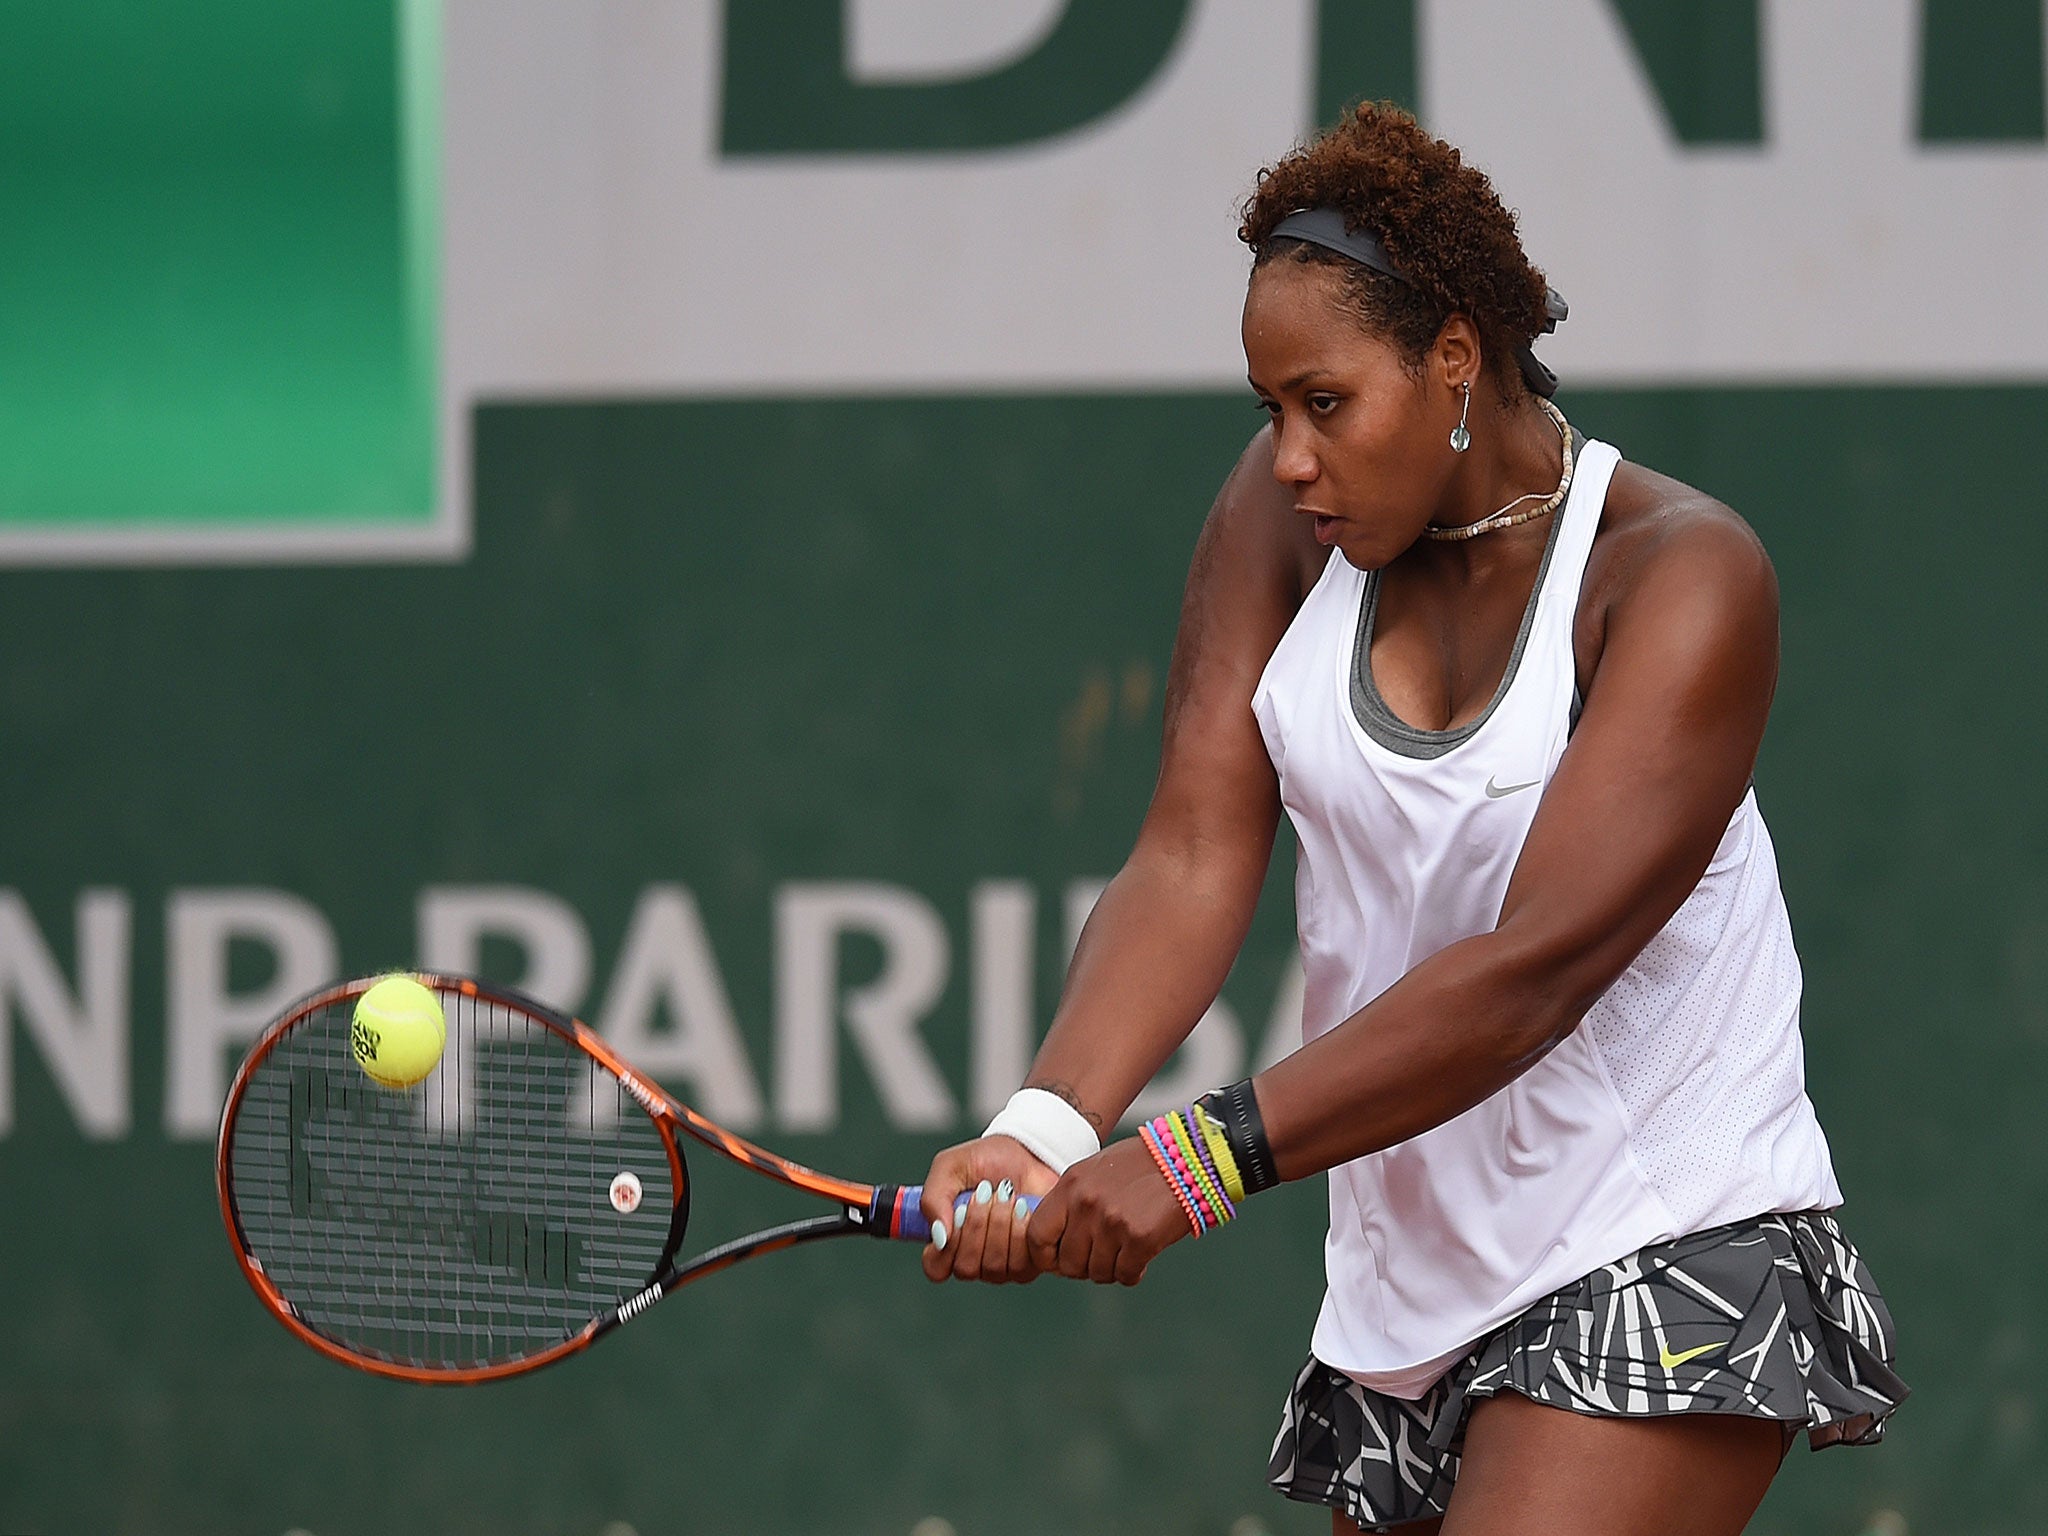 American teenager Taylor Townsend, who is making her debut at Wimbledon